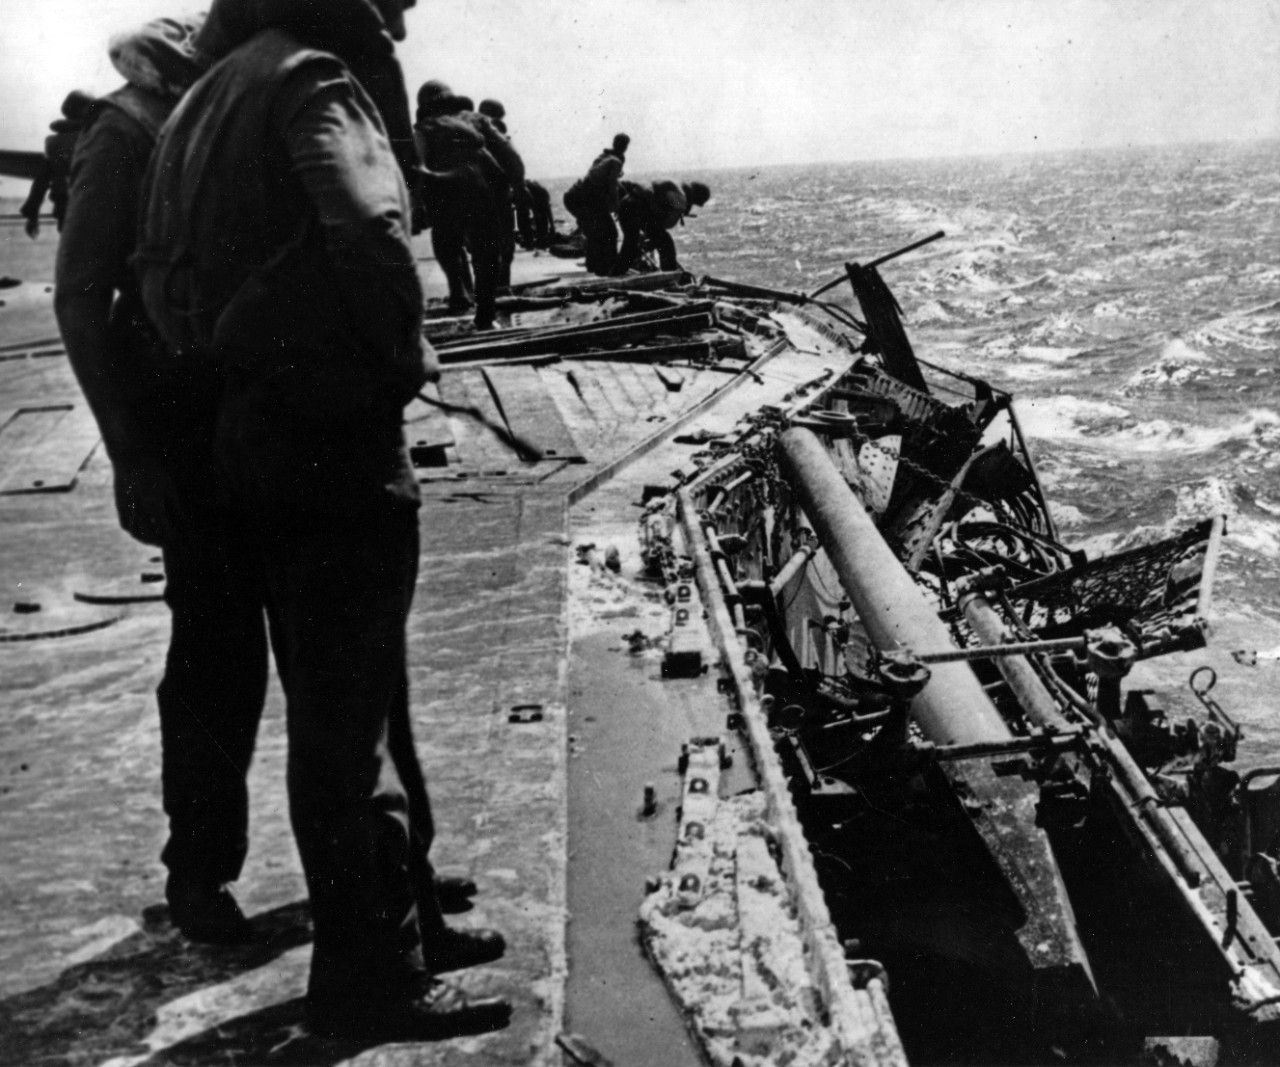 Photo #: 80-G-17039  Battle of the Coral Sea, May 1942